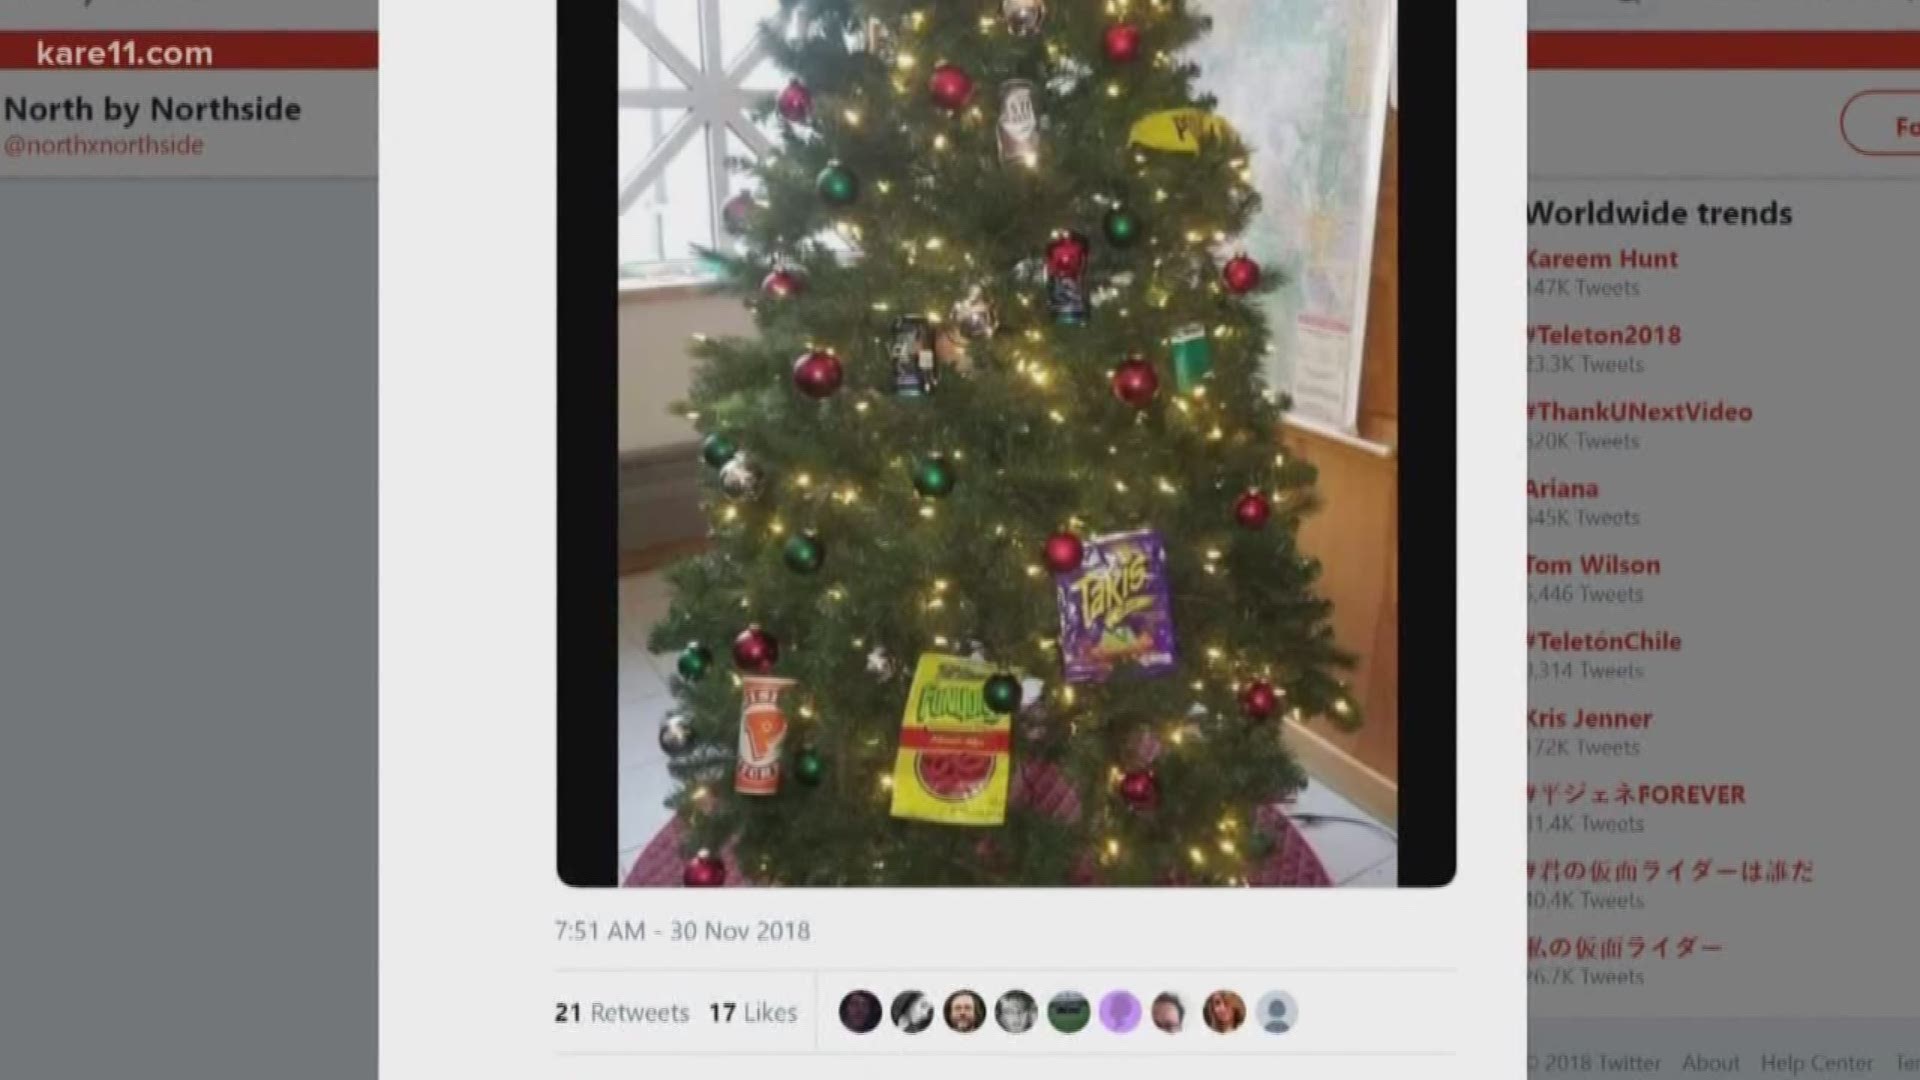 Two Minneapolis Police officers have been "relieved of duty" in connection to the Christmas tree incident at the Fourth Precinct, according to a police spokesperson.The officers have not been fired and will continue to be paid during the ongoing investiga